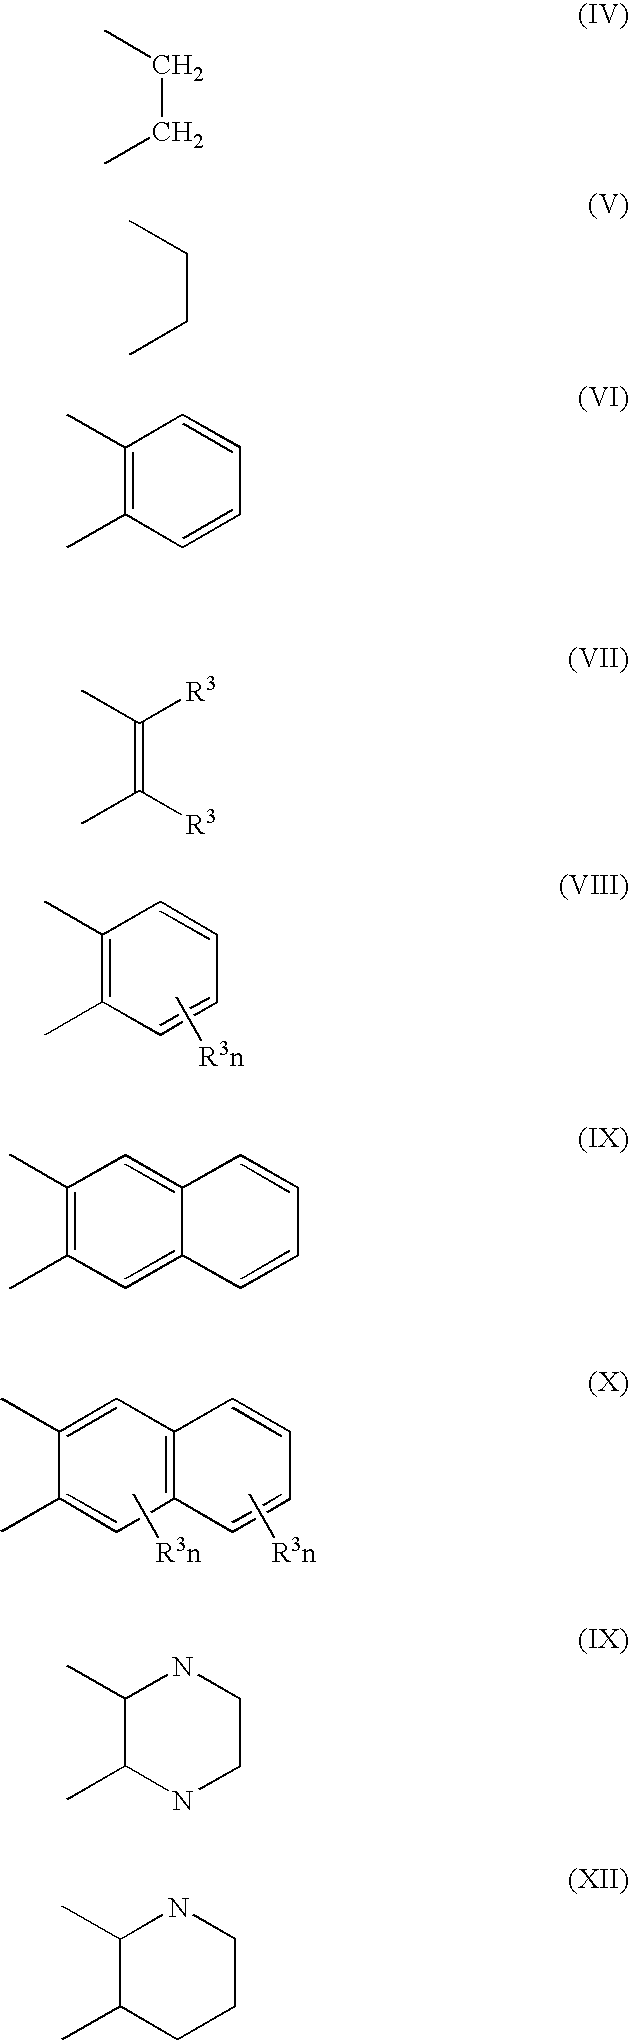 Stabilization of olefin metathesis product mixtures